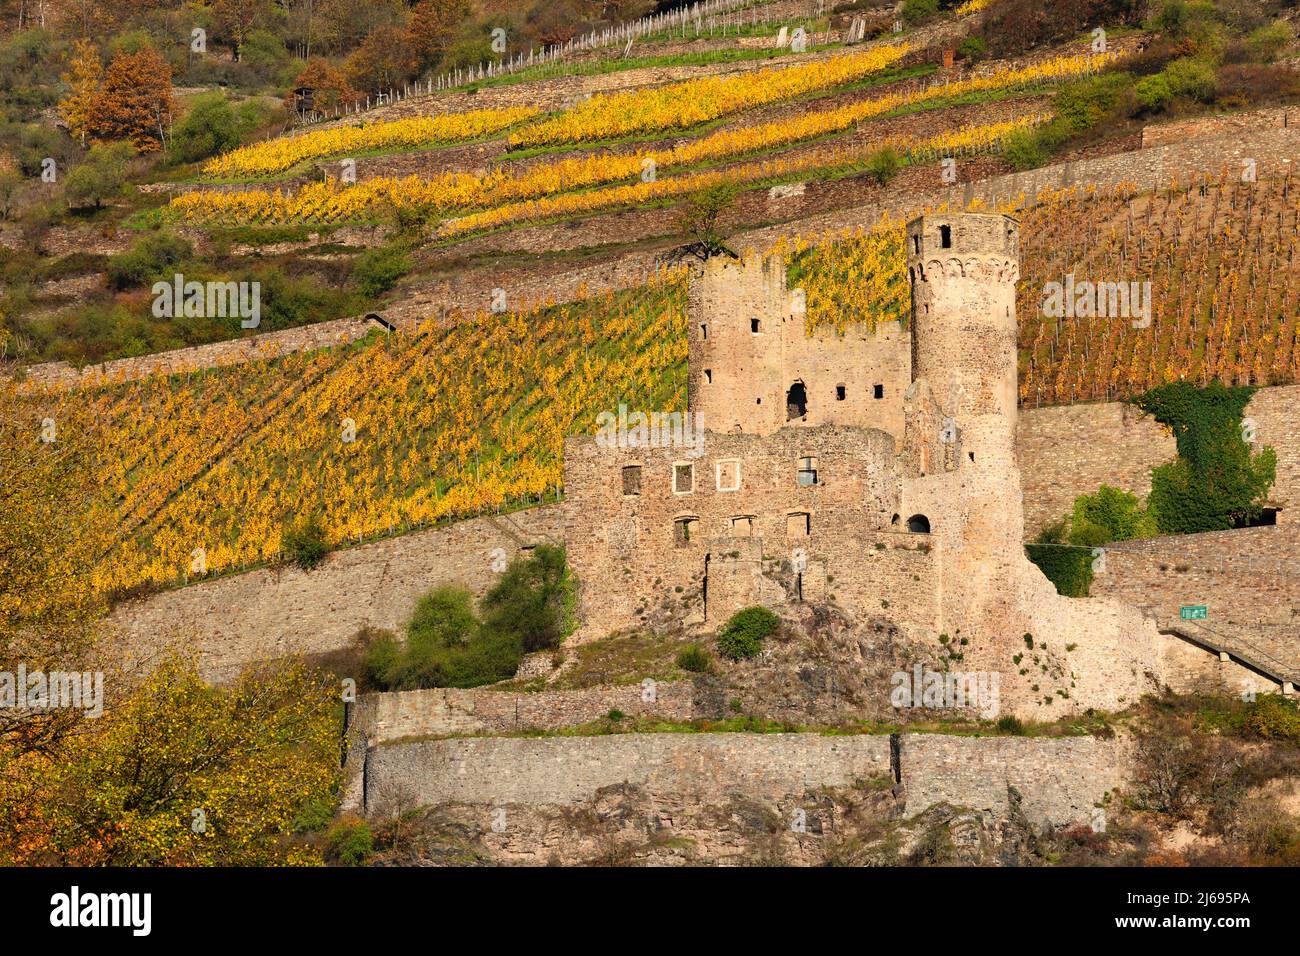 Castle ruin, Ehrenfels, Upper Middle Rhine Valley, Hesse, Germany Stock Photo